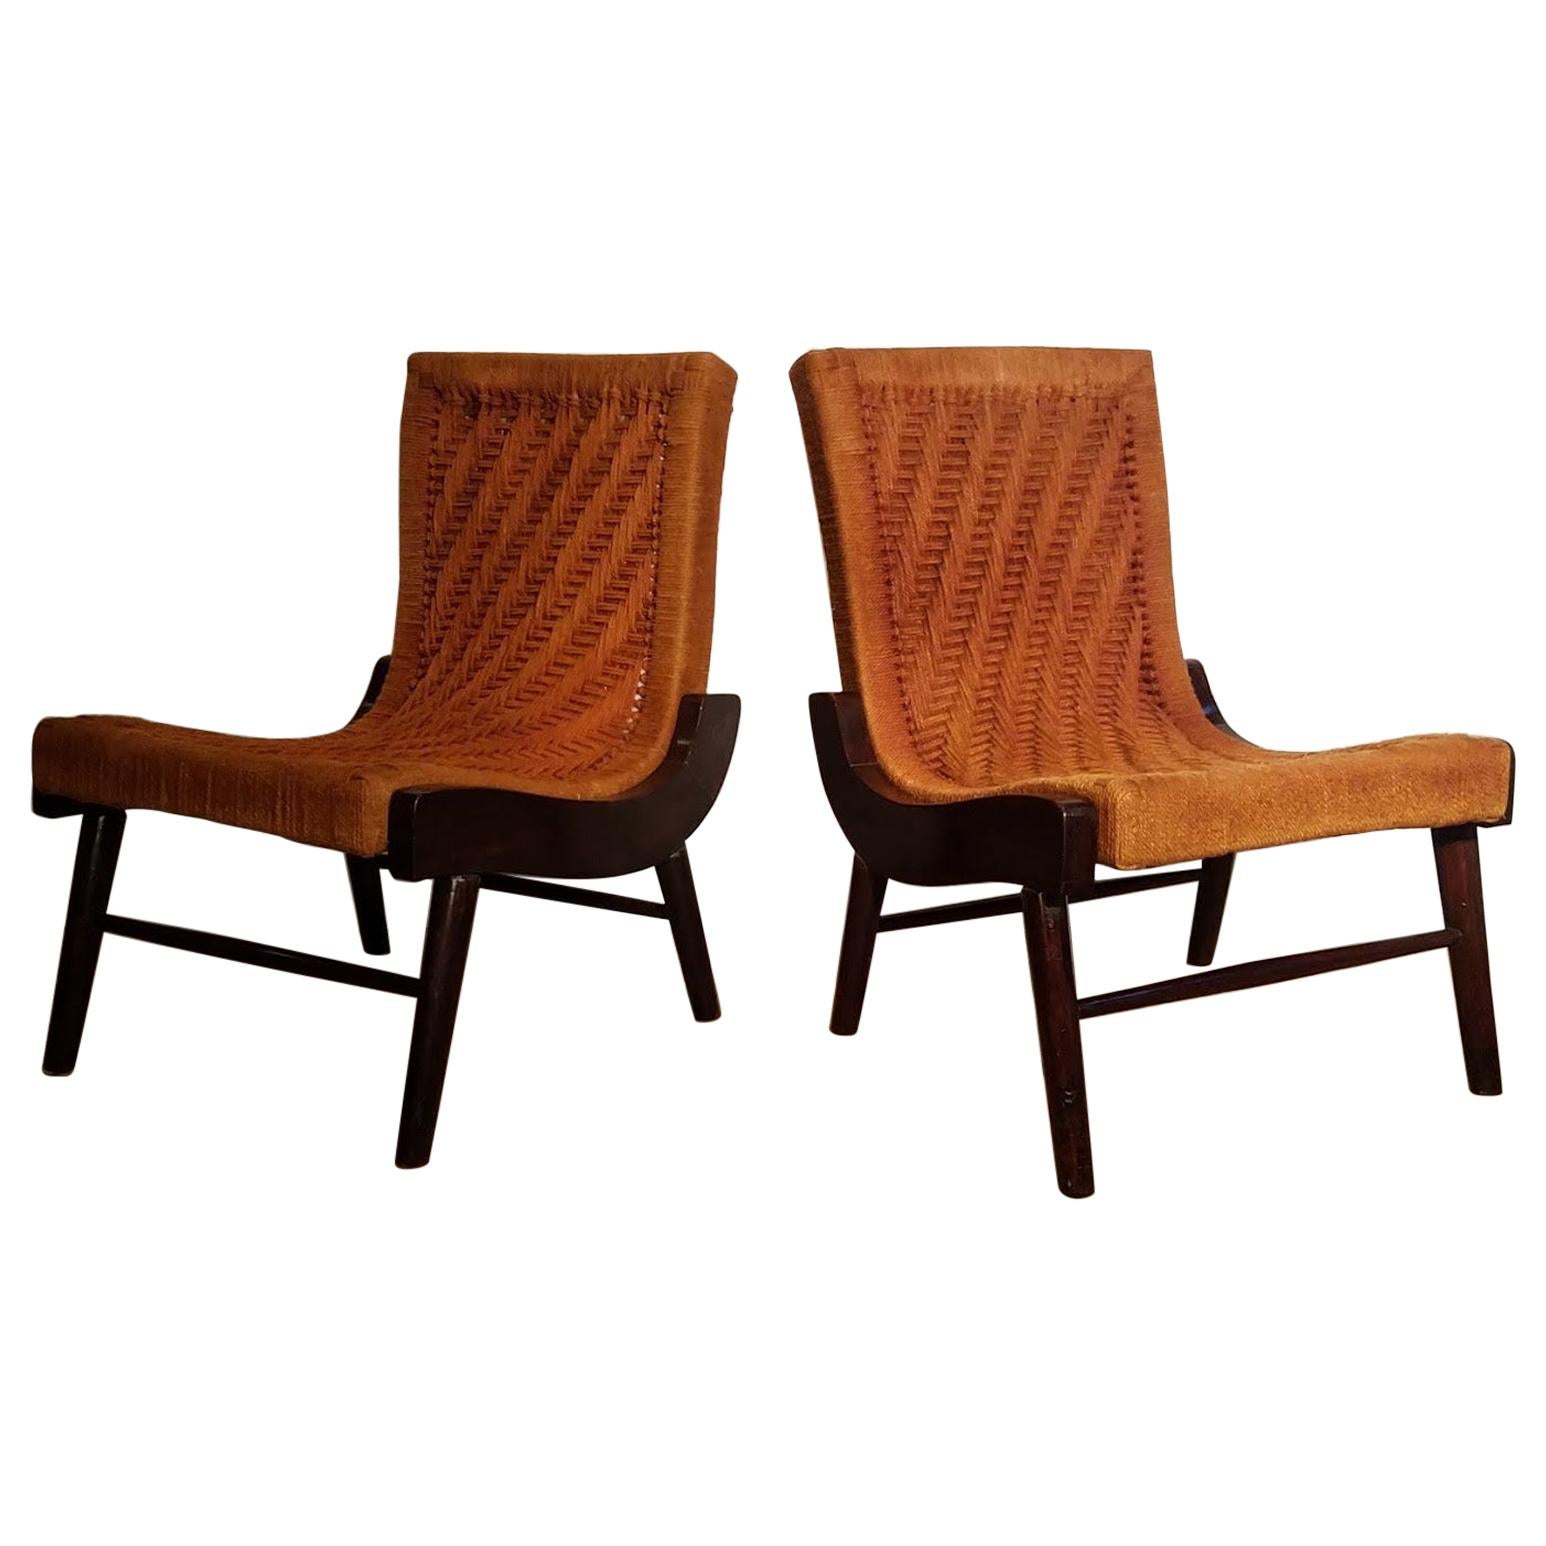 Pair of Cocobolo Rosewood and Hemp Cord 1940s Lounge Chairs Rare